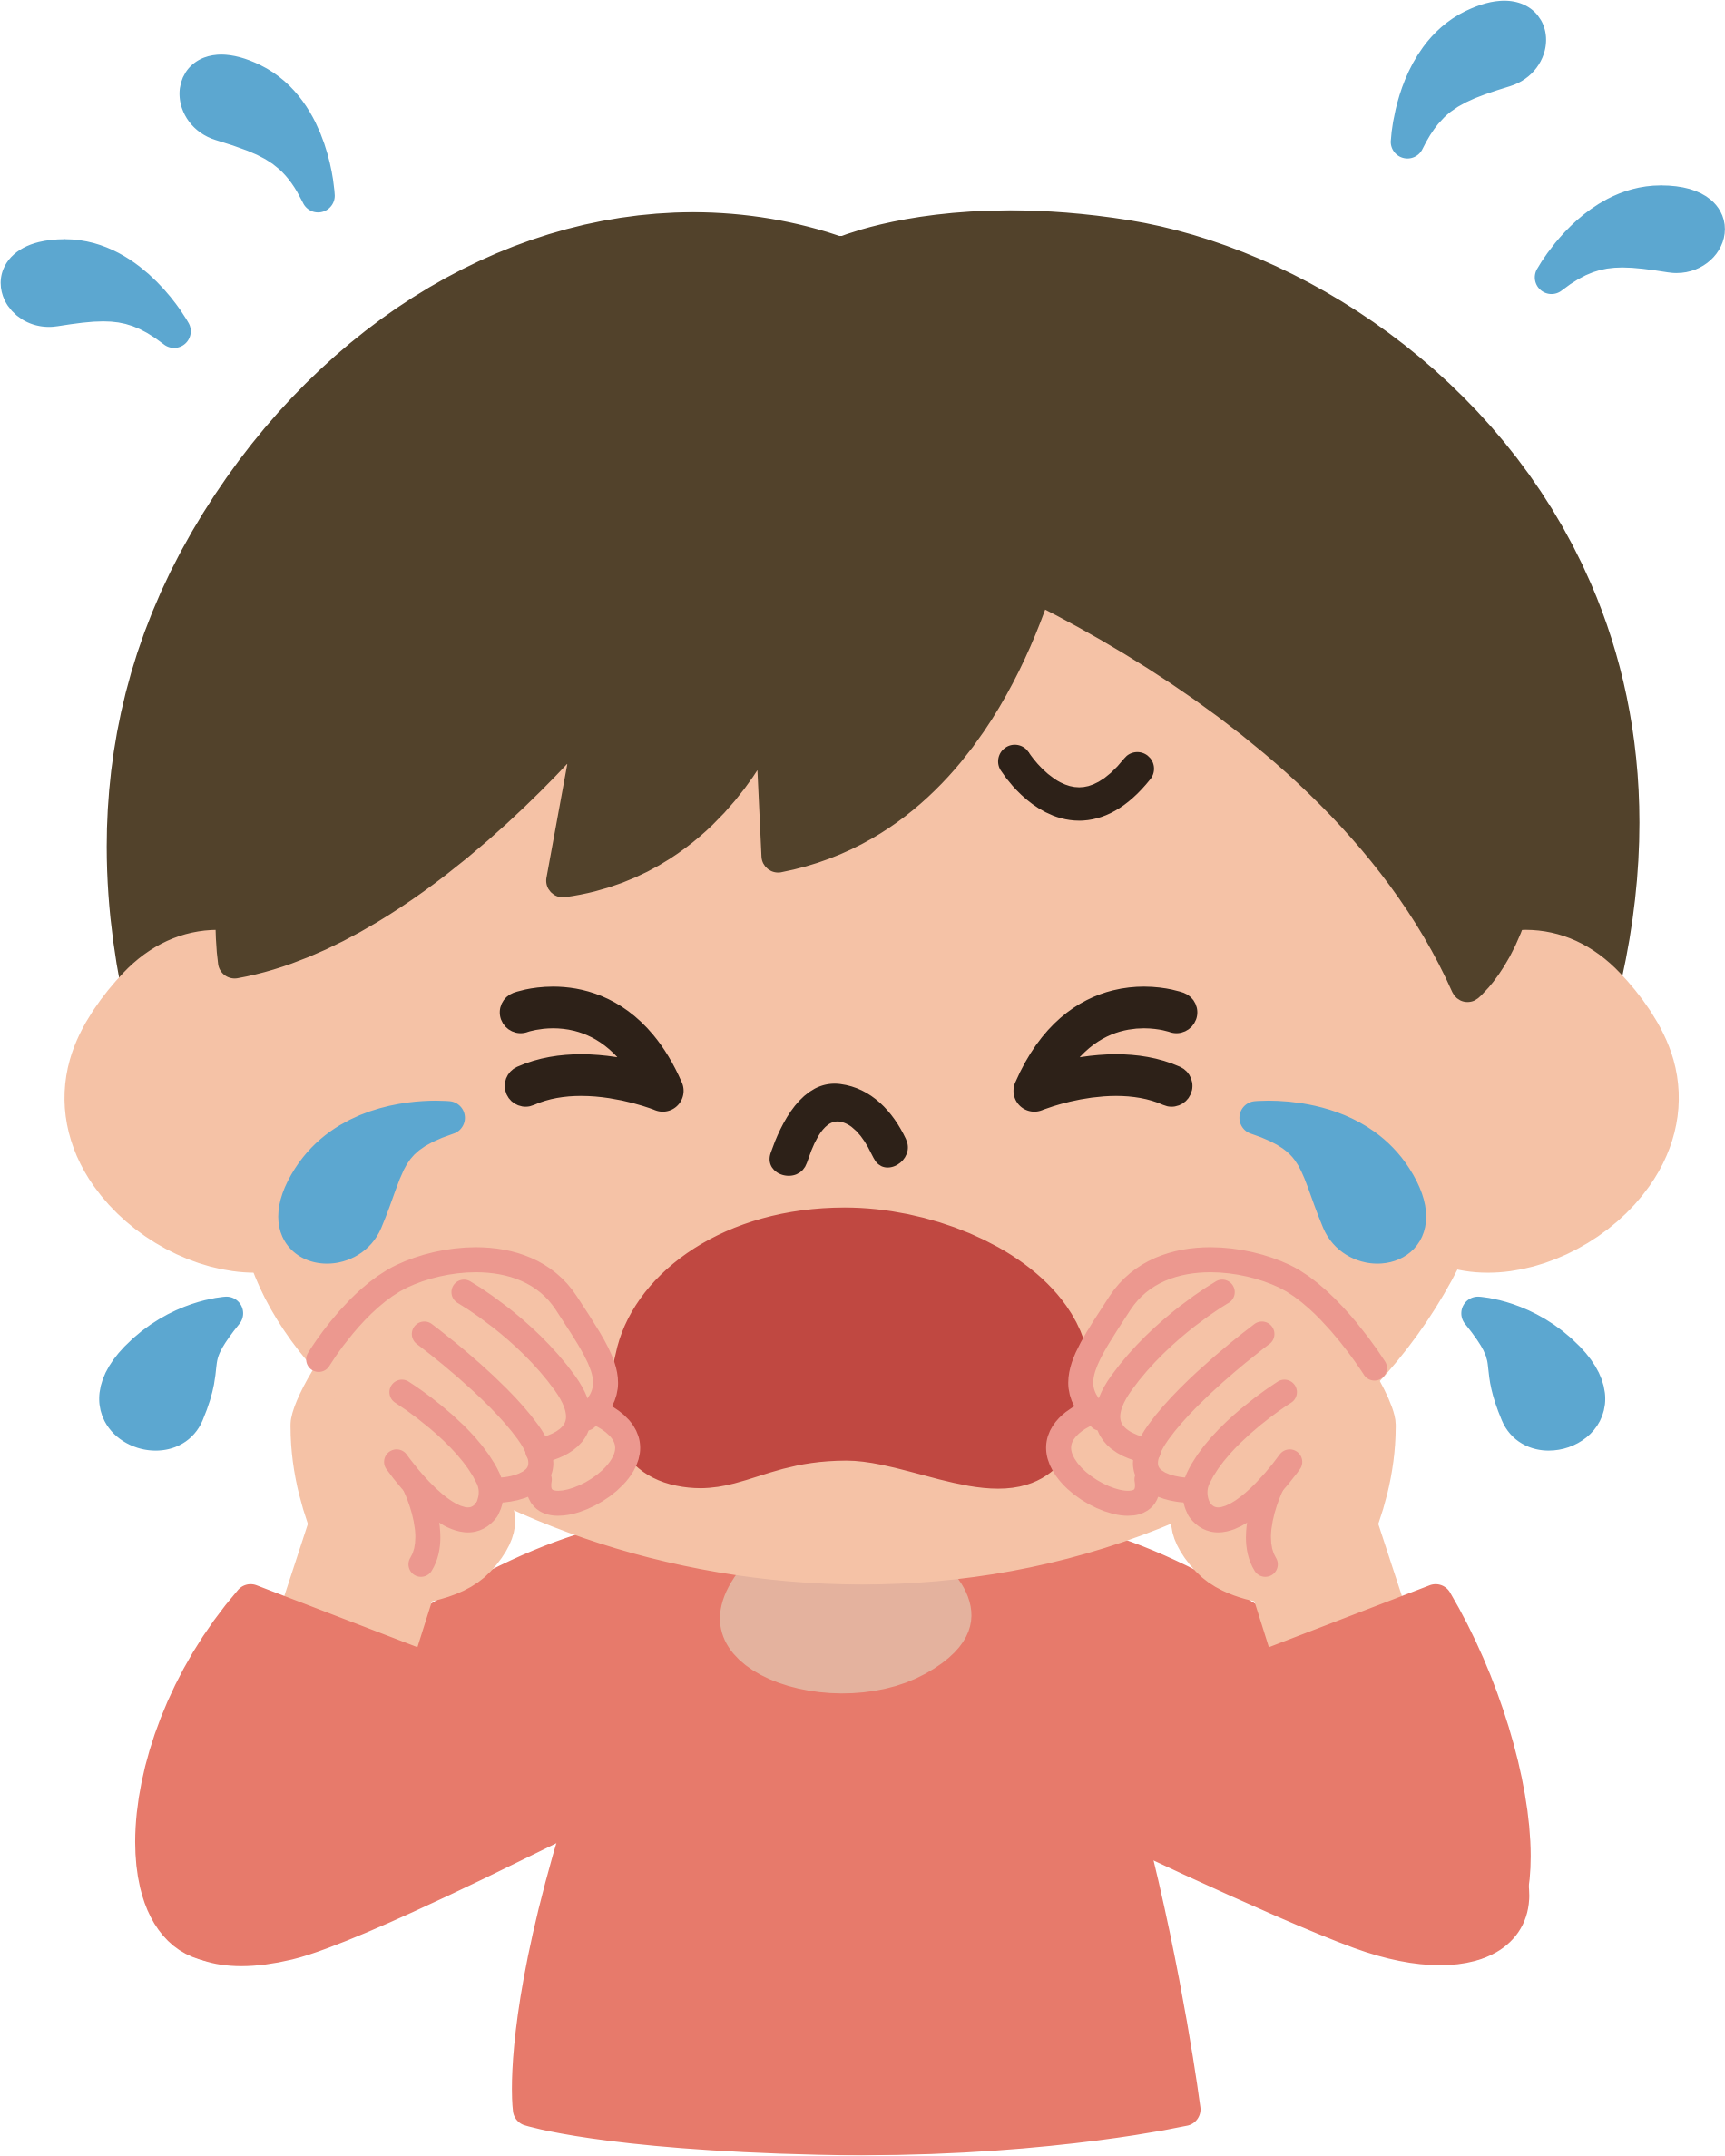 14 cliparts for free. Download Crying clipart and use in.